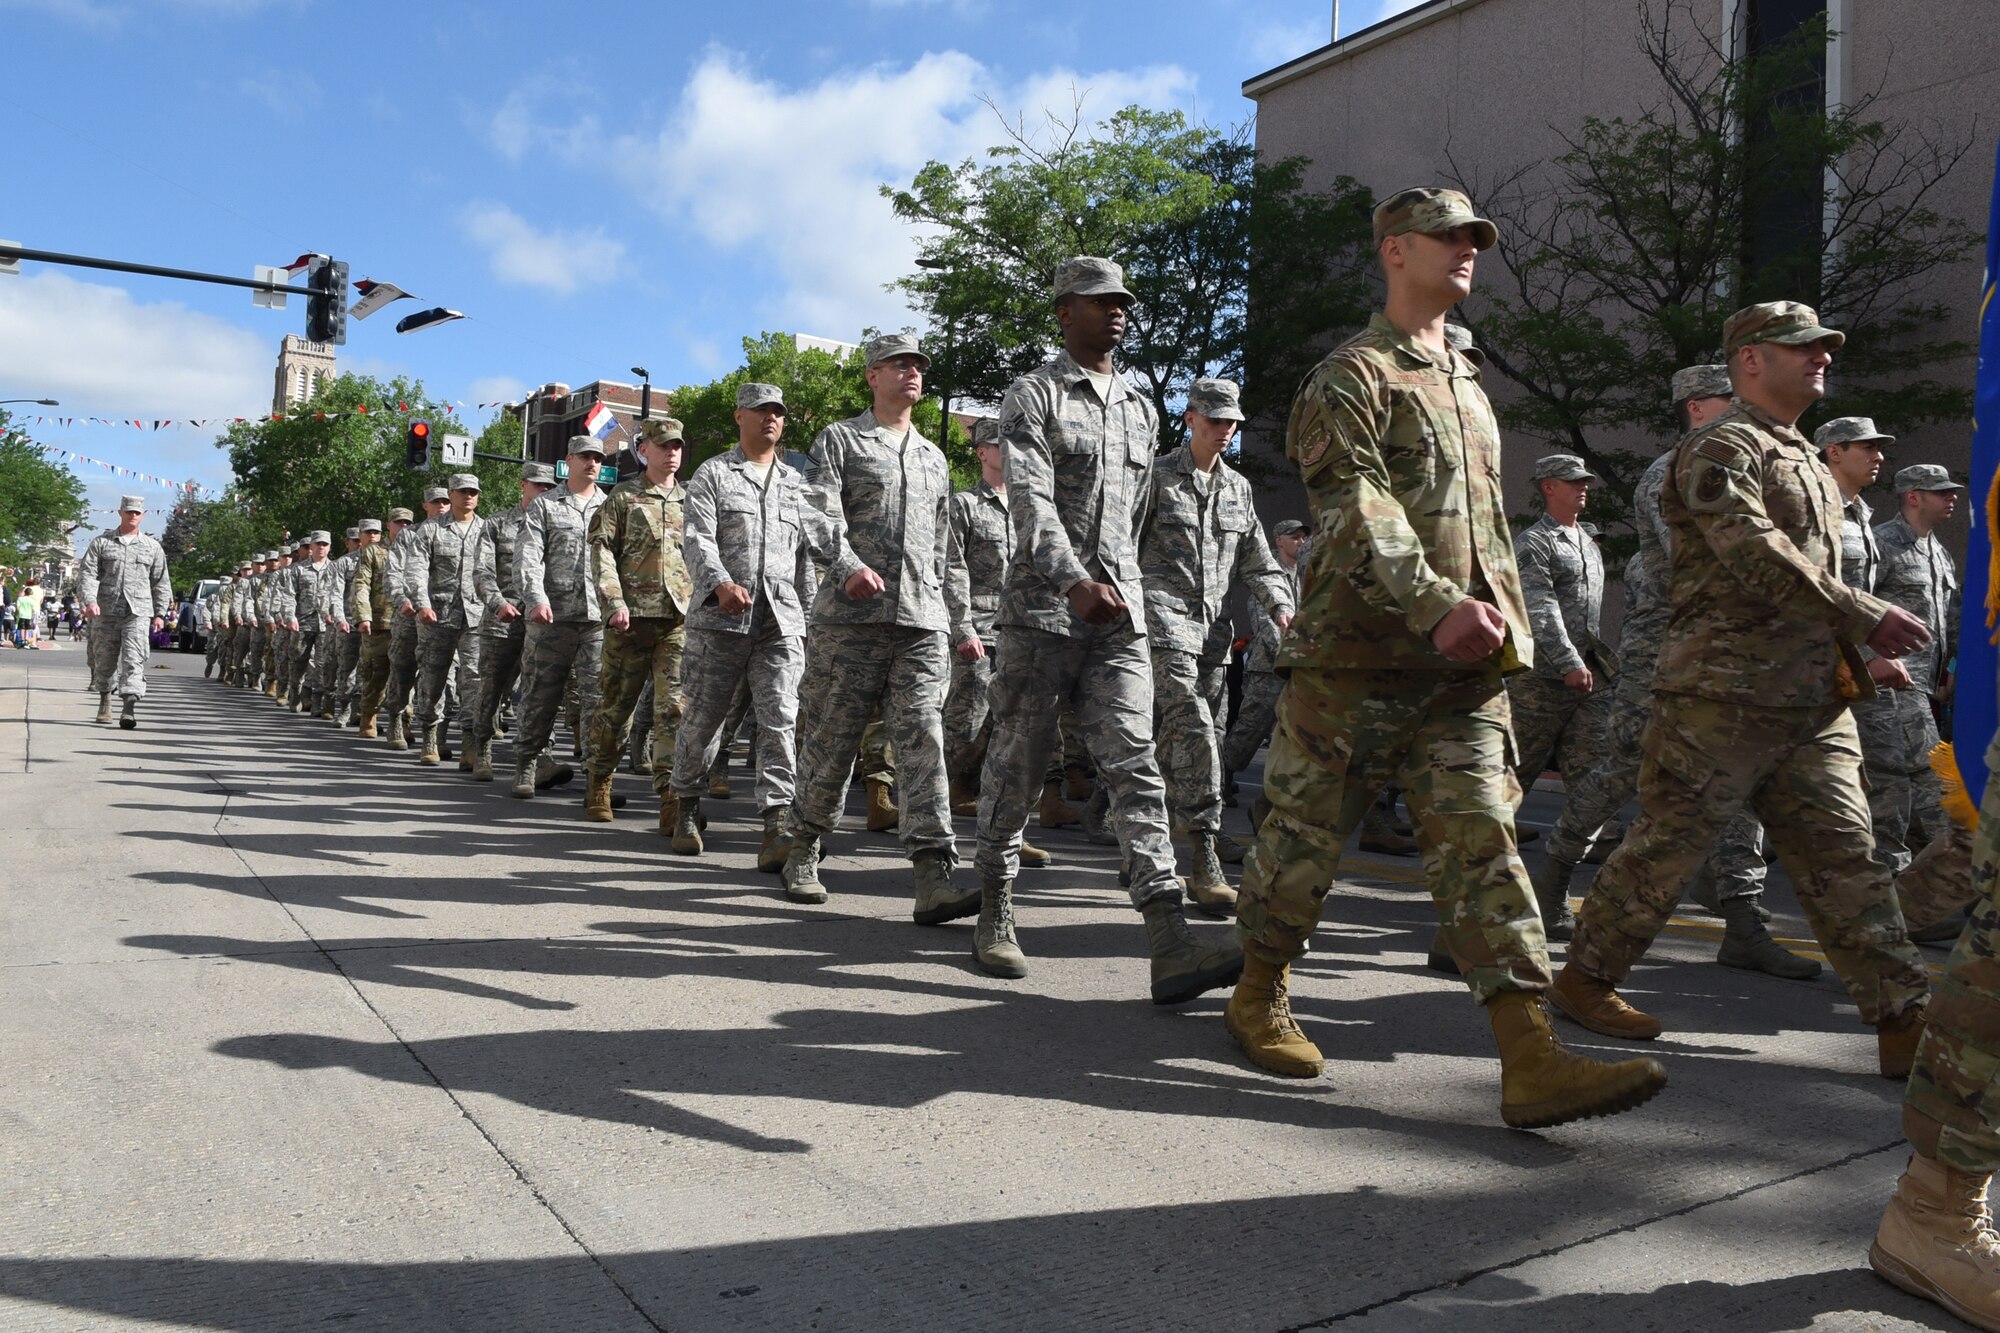 Airmen from F.E. Warren Air Force Base, Wyo., march in formation during the 123rd Cheyenne Frontier Days opening Grand Parade in Cheyenne, Wyo., July 21, 2018. Service members from multiple branches took part in the parade, as well as a number of civic and veteran service organizations. This year marks the 152nd anniversary of F.E. Warren Air Force Base and the city of Cheyenne. The F.E. Warren Air Force Base and Cheyenne communities came together to celebrate the CFD rodeo and festival, which runs from July 20-29. (U.S. Air Force photo illustration by Senior Airman Breanna Carter)